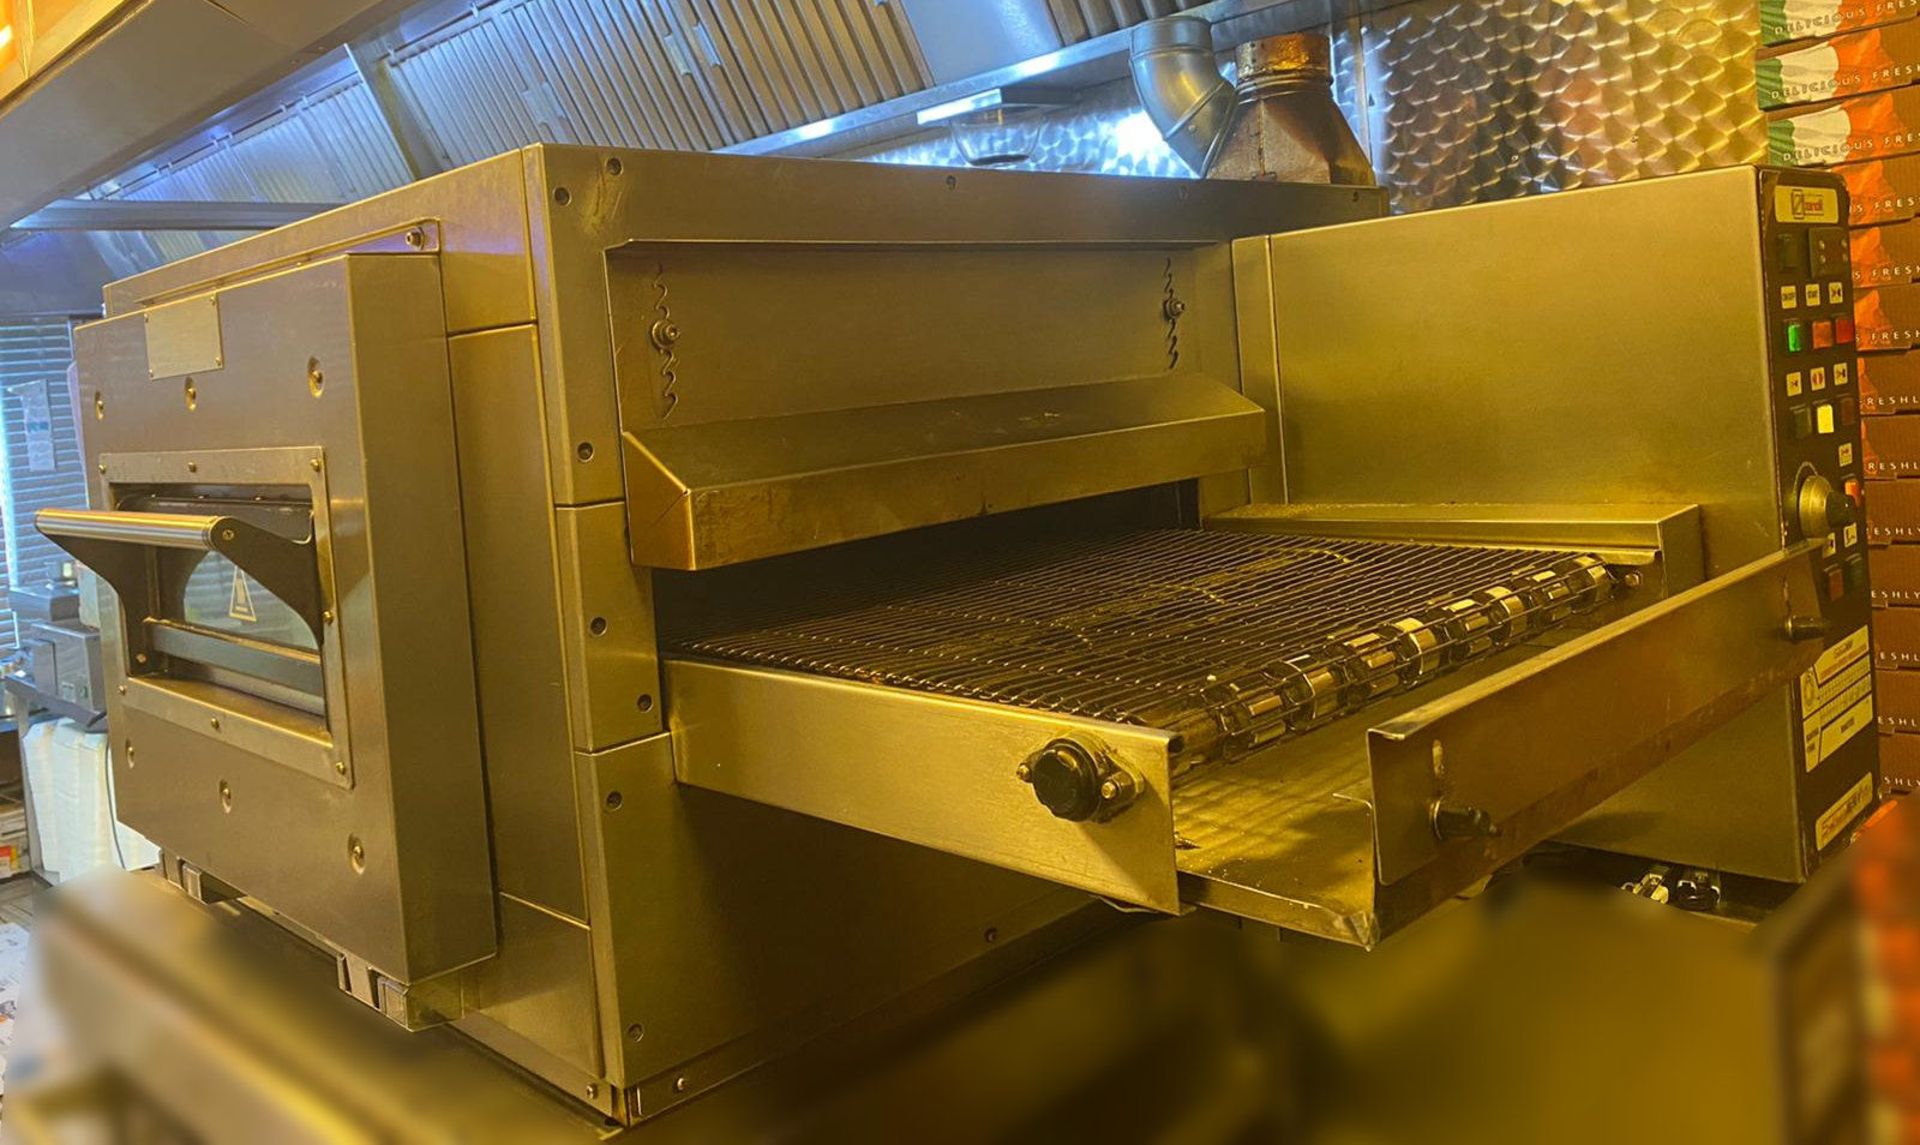 1 x Zanolli Synthesis 08/50 V Conveyor Pizza Oven - Requires repair - CL633 - Location: - Image 2 of 7